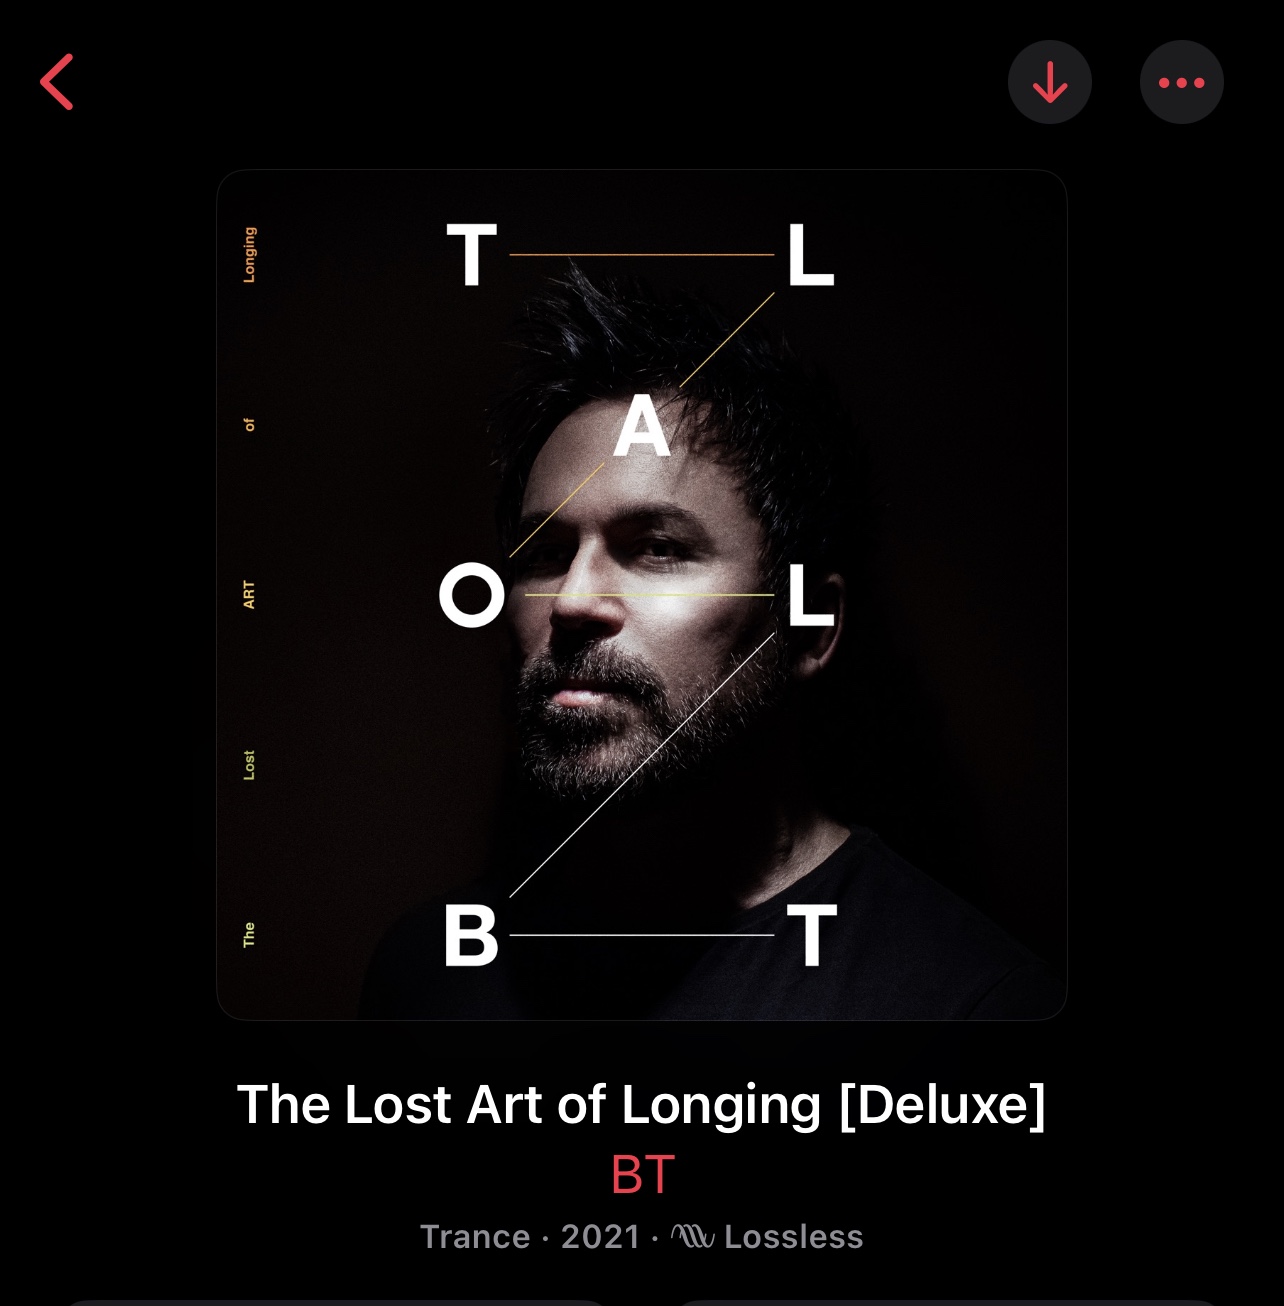 BT “The Lost Art of Longing”